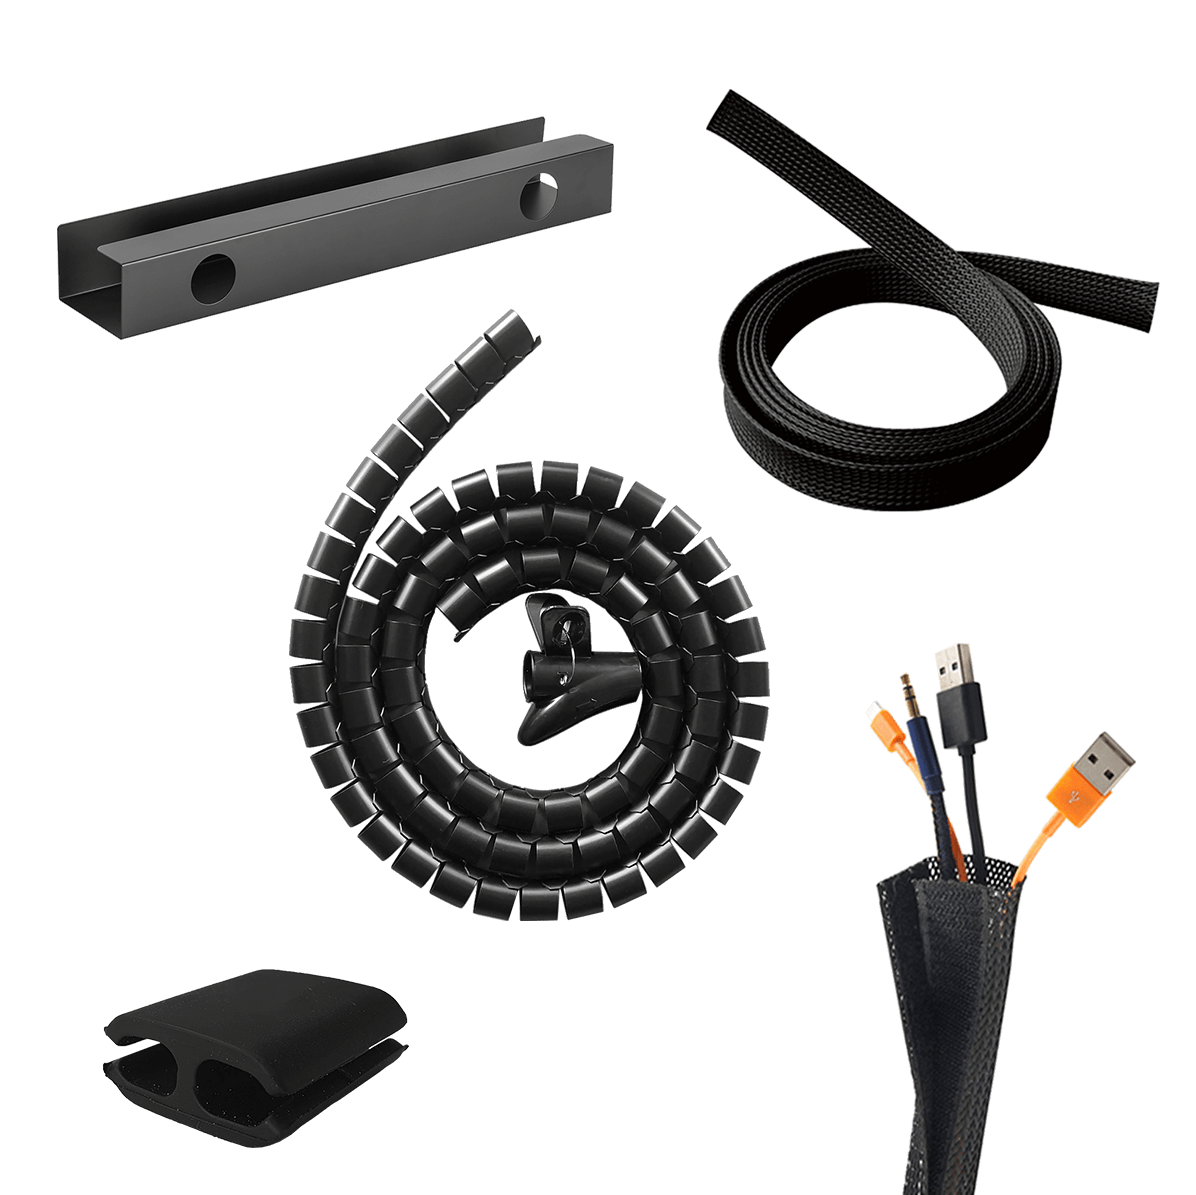 UVI Ultimate Cable Management Kit - Perfect for home or office